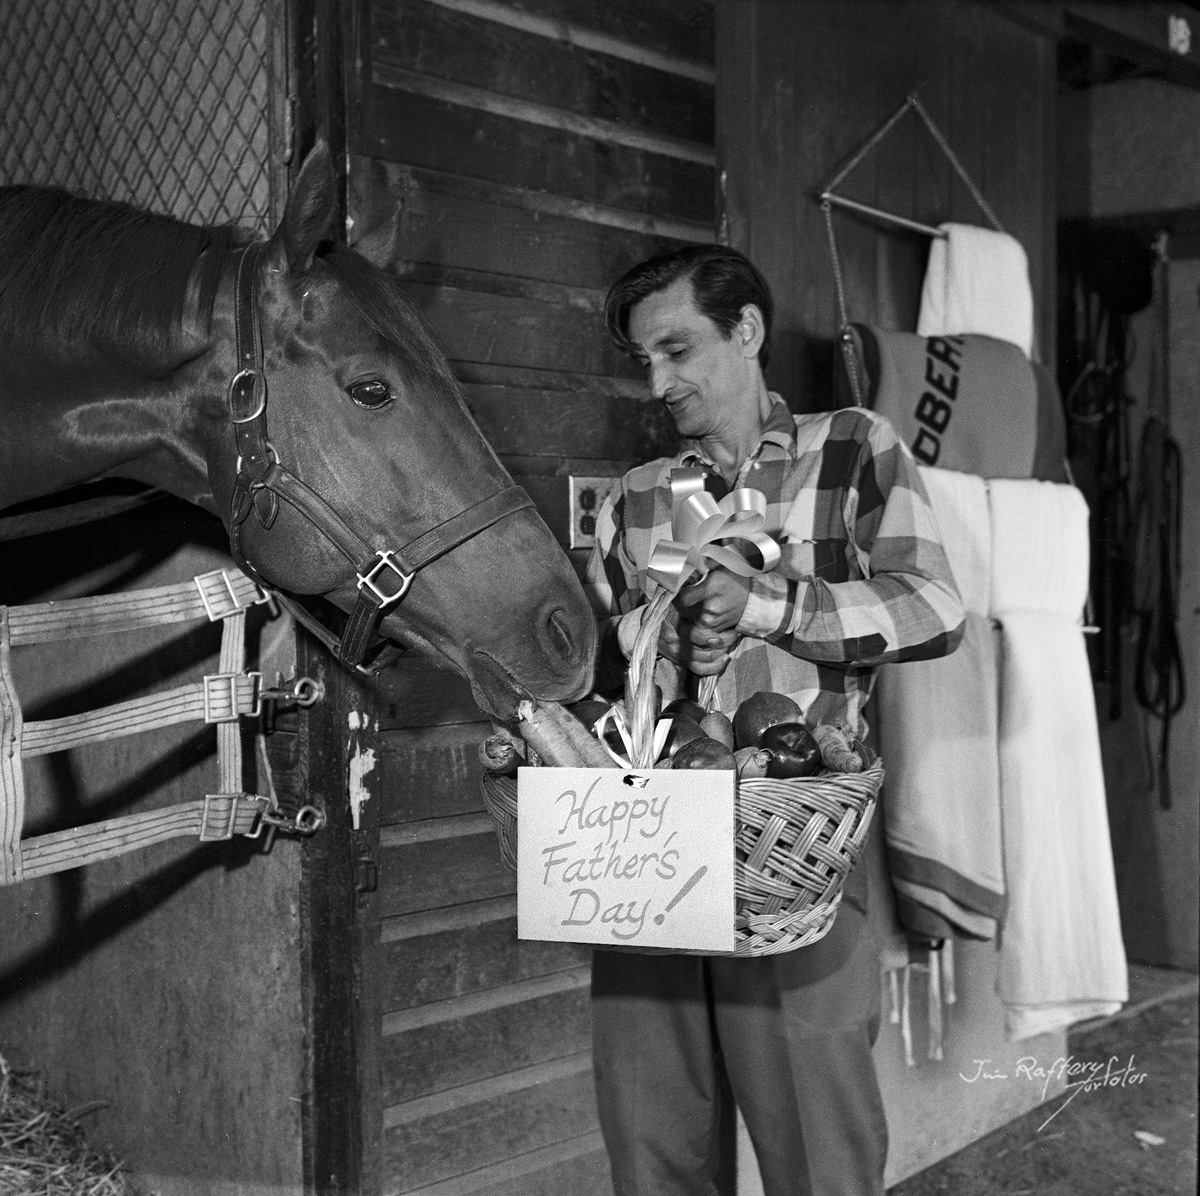 Big Rock Candy with trainer Leonard Loveridge, for a Father's Day promotion photograph. The caption noted that Big Rock Candy was "Father of the Year." (Jim Raftery Turfotos)